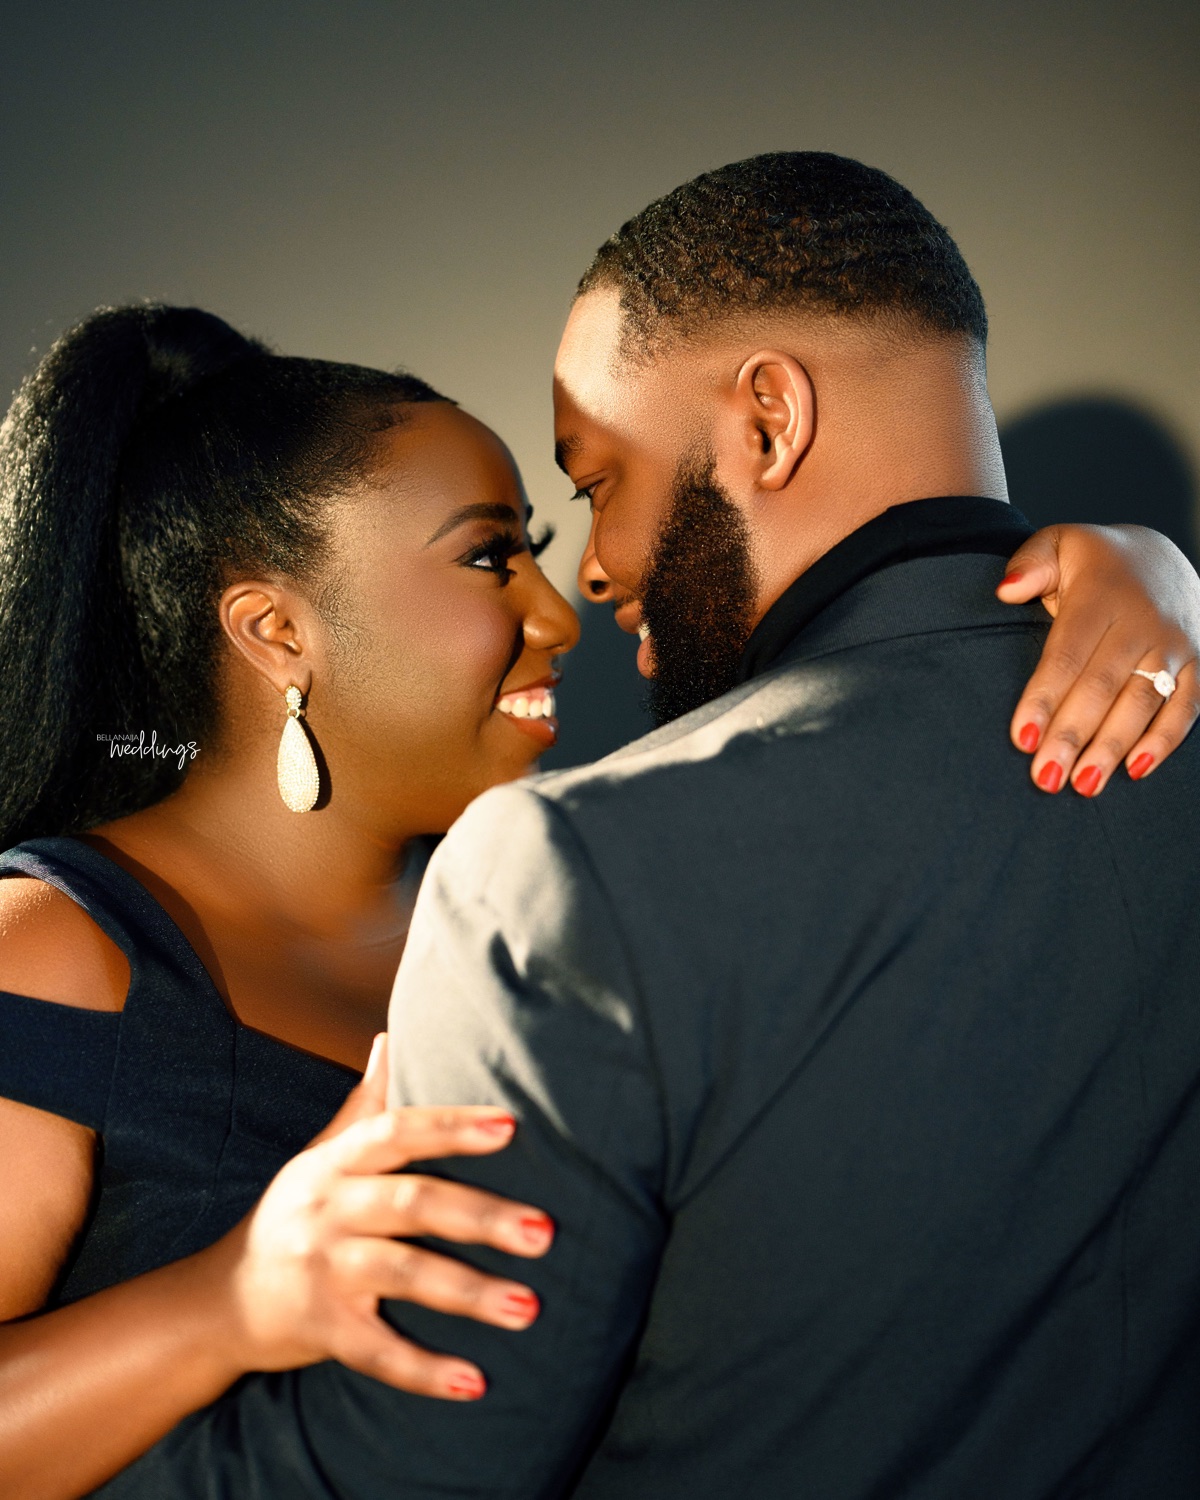 #FromNaijatoGhana, The Love Story of Chinenye and Kwame